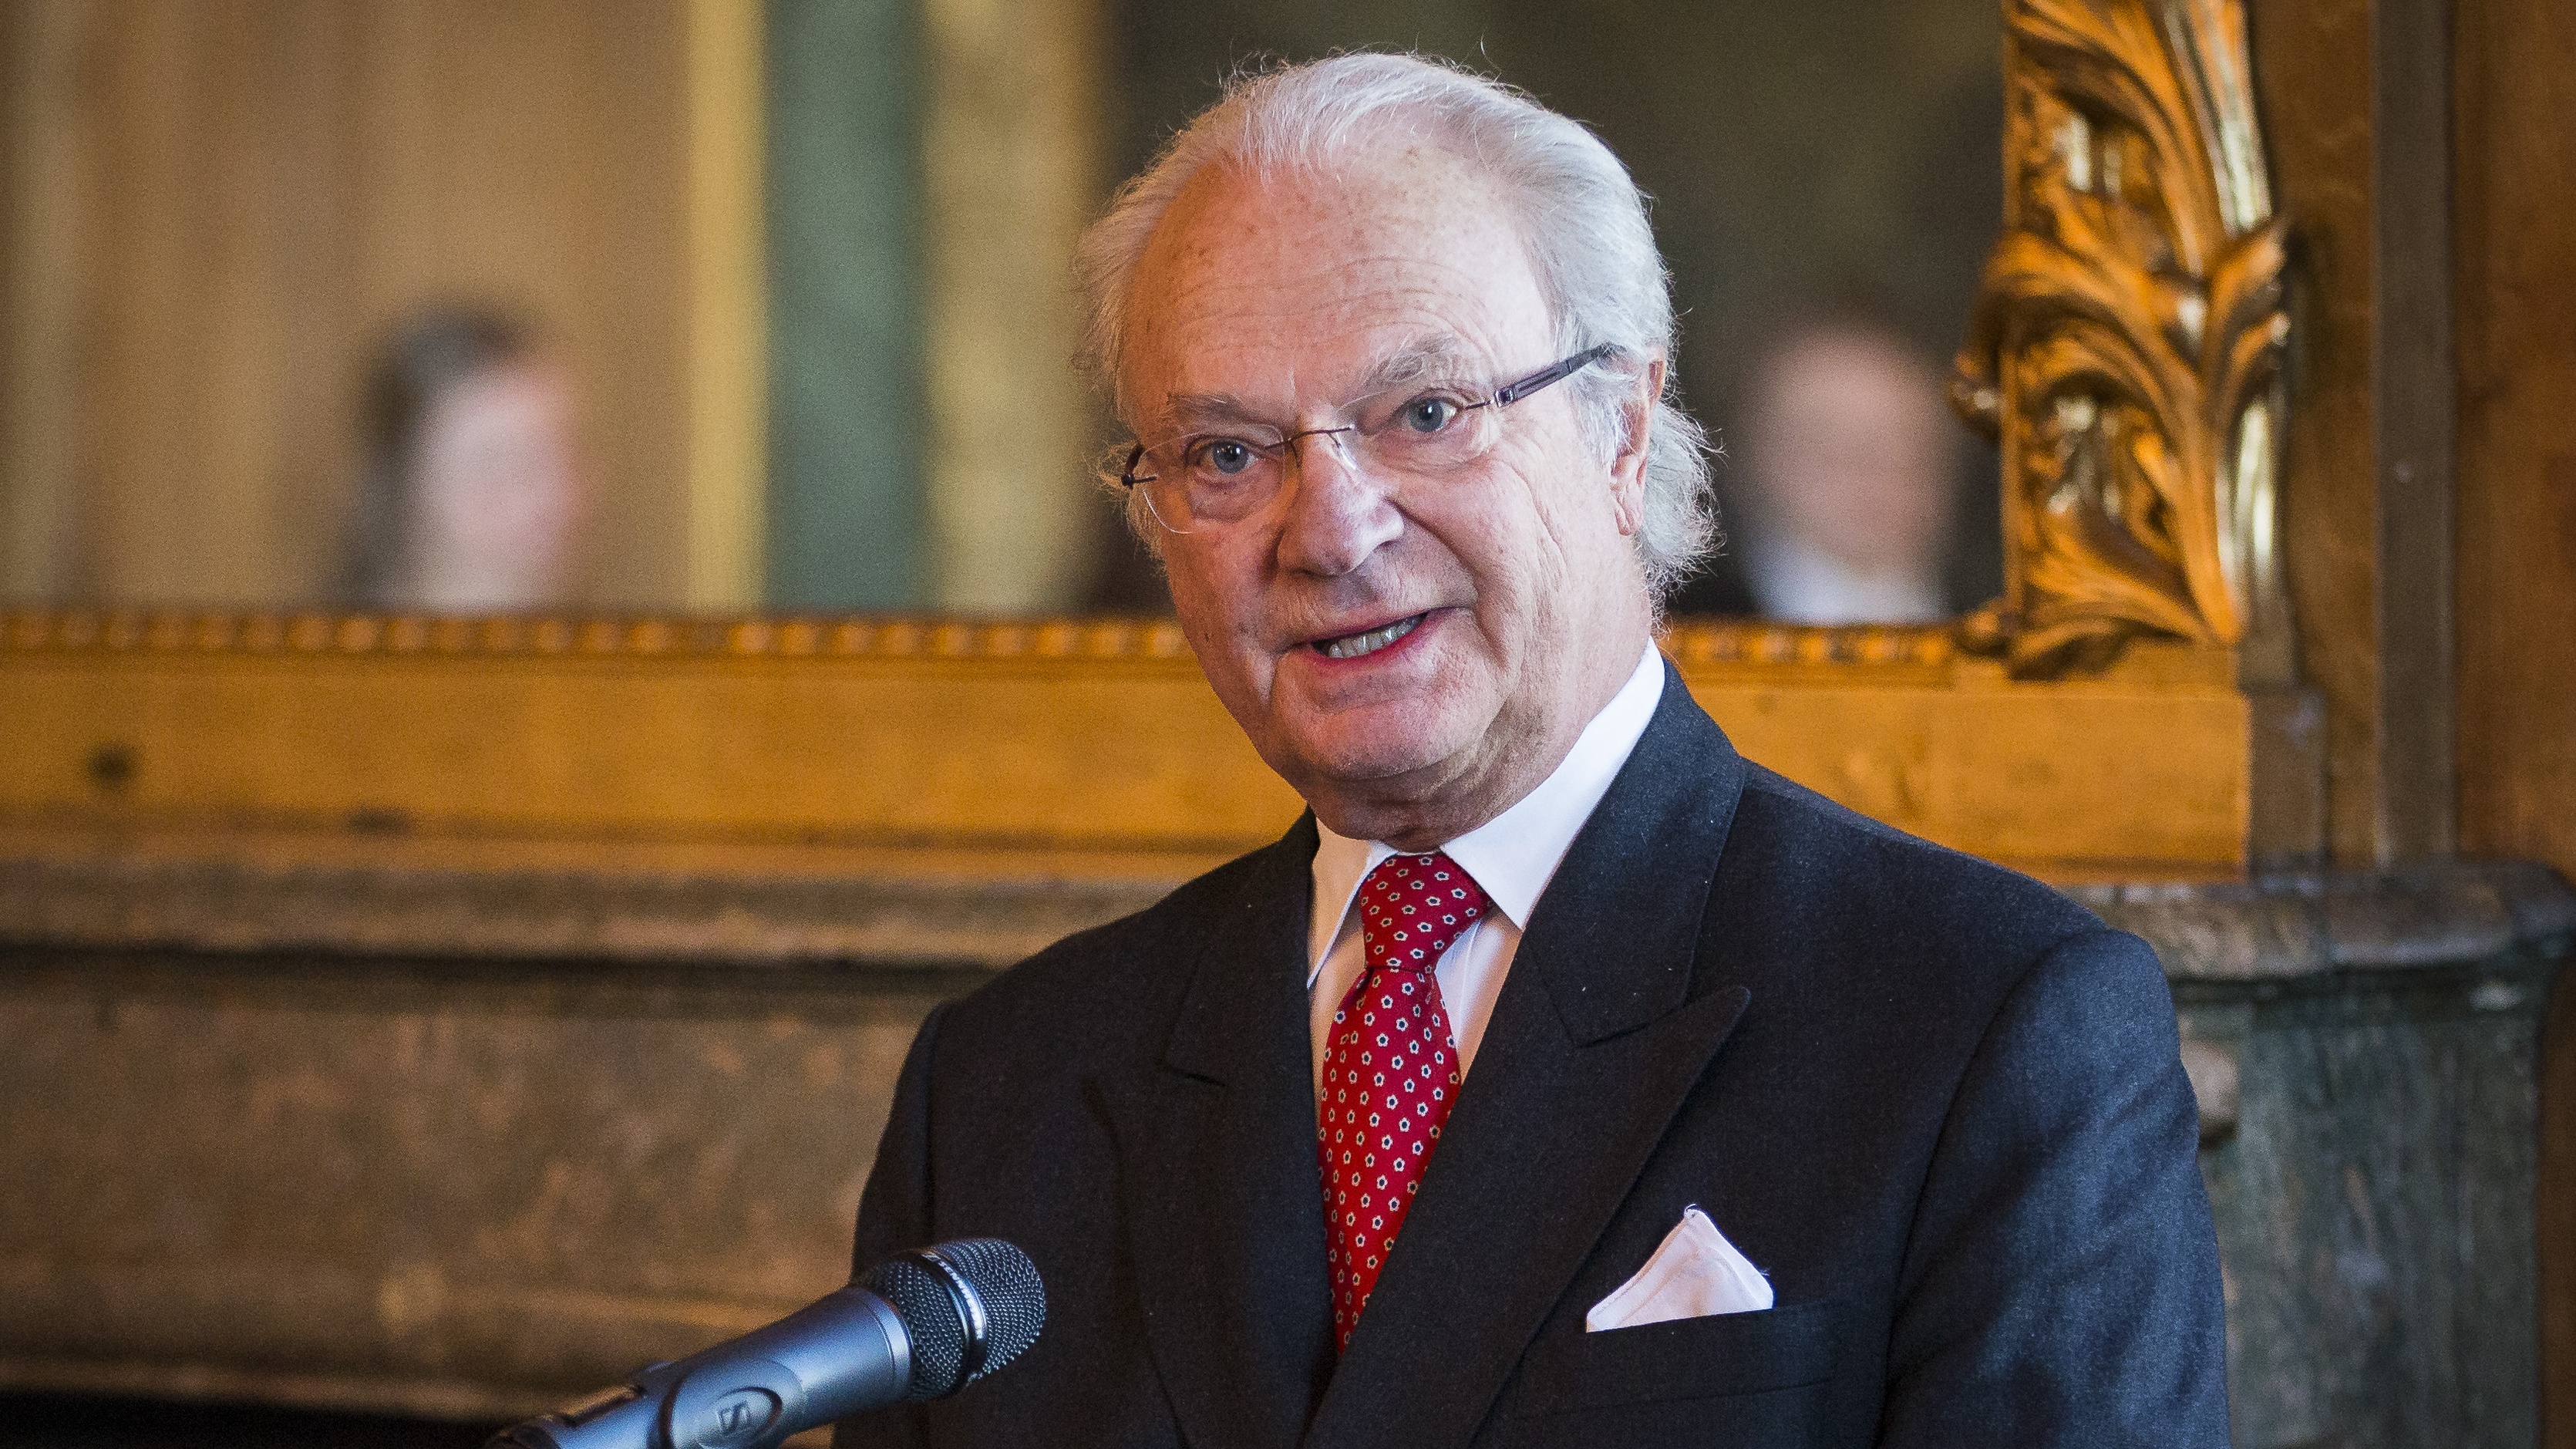 King Carl XVI Gustaf of Sweden gives a speech at the opening of the exhibition.